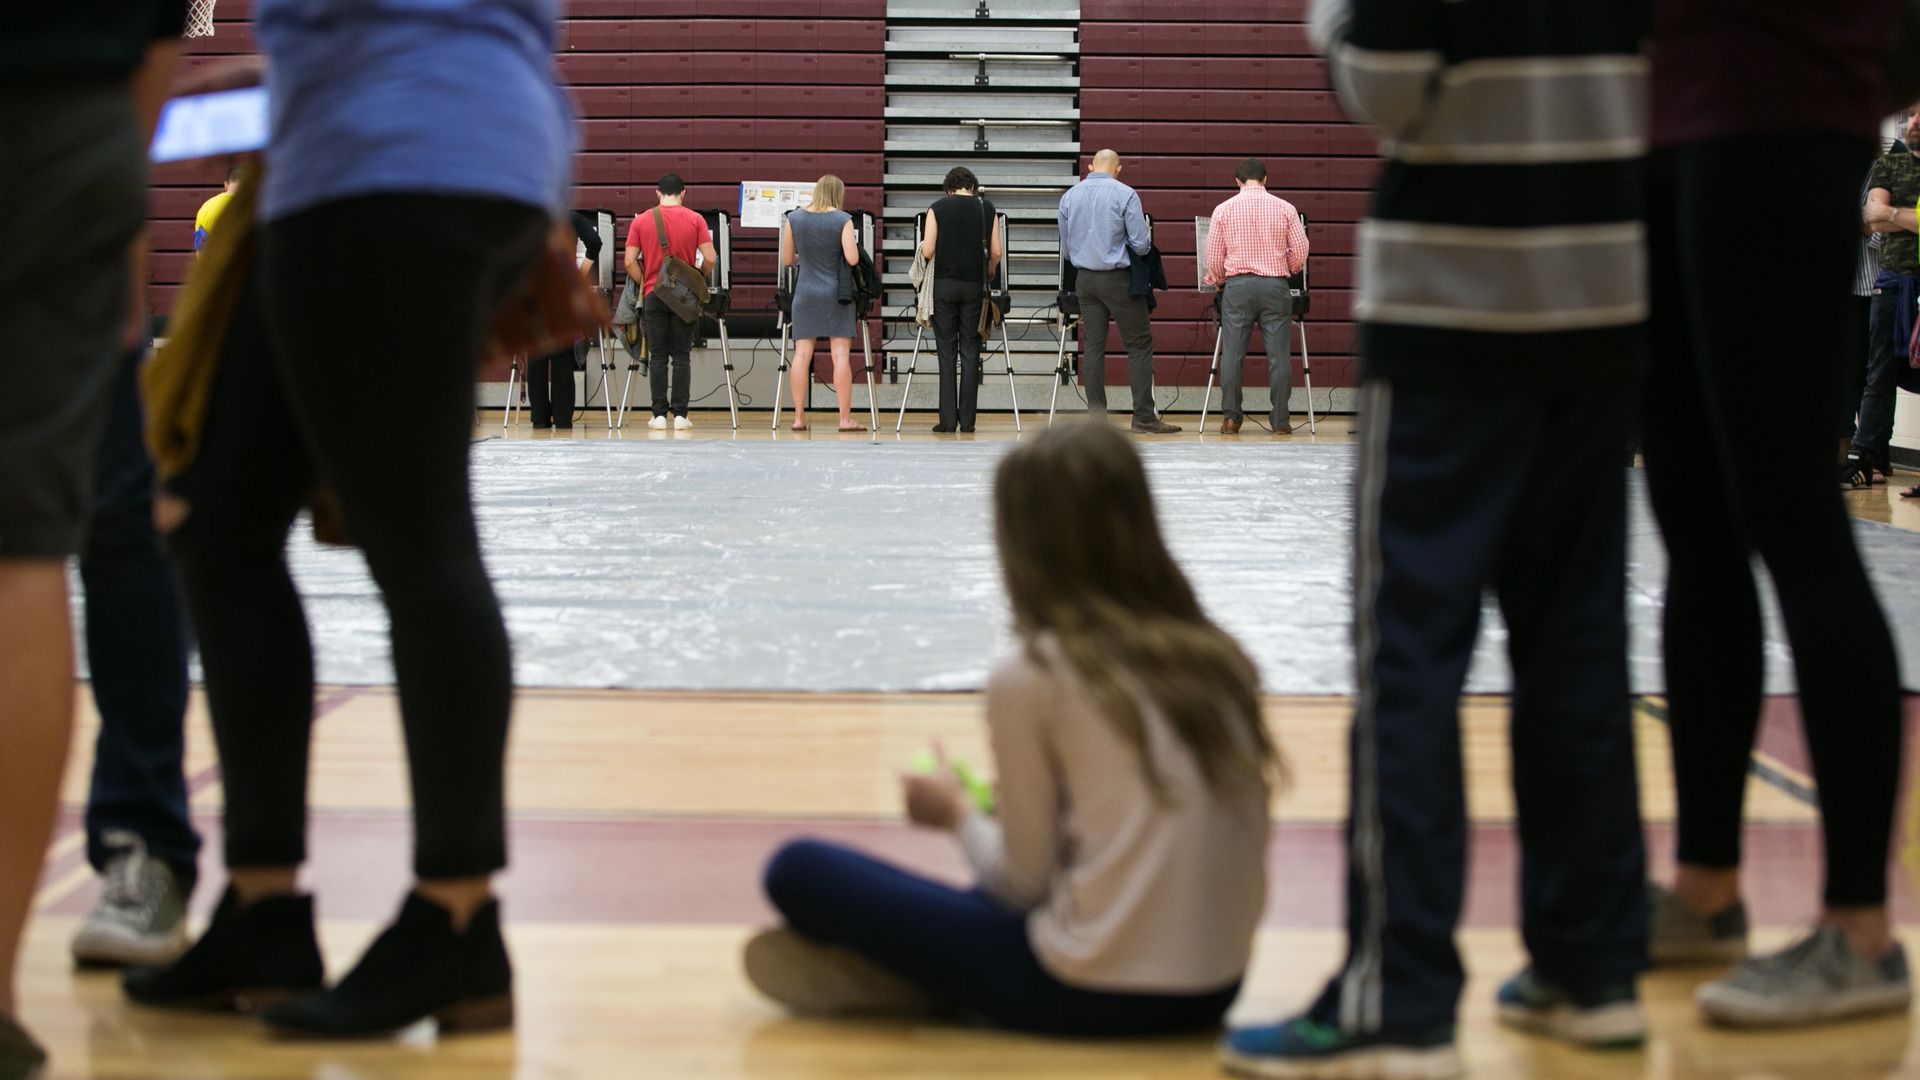 Voters in a gymnasium line up to vote.